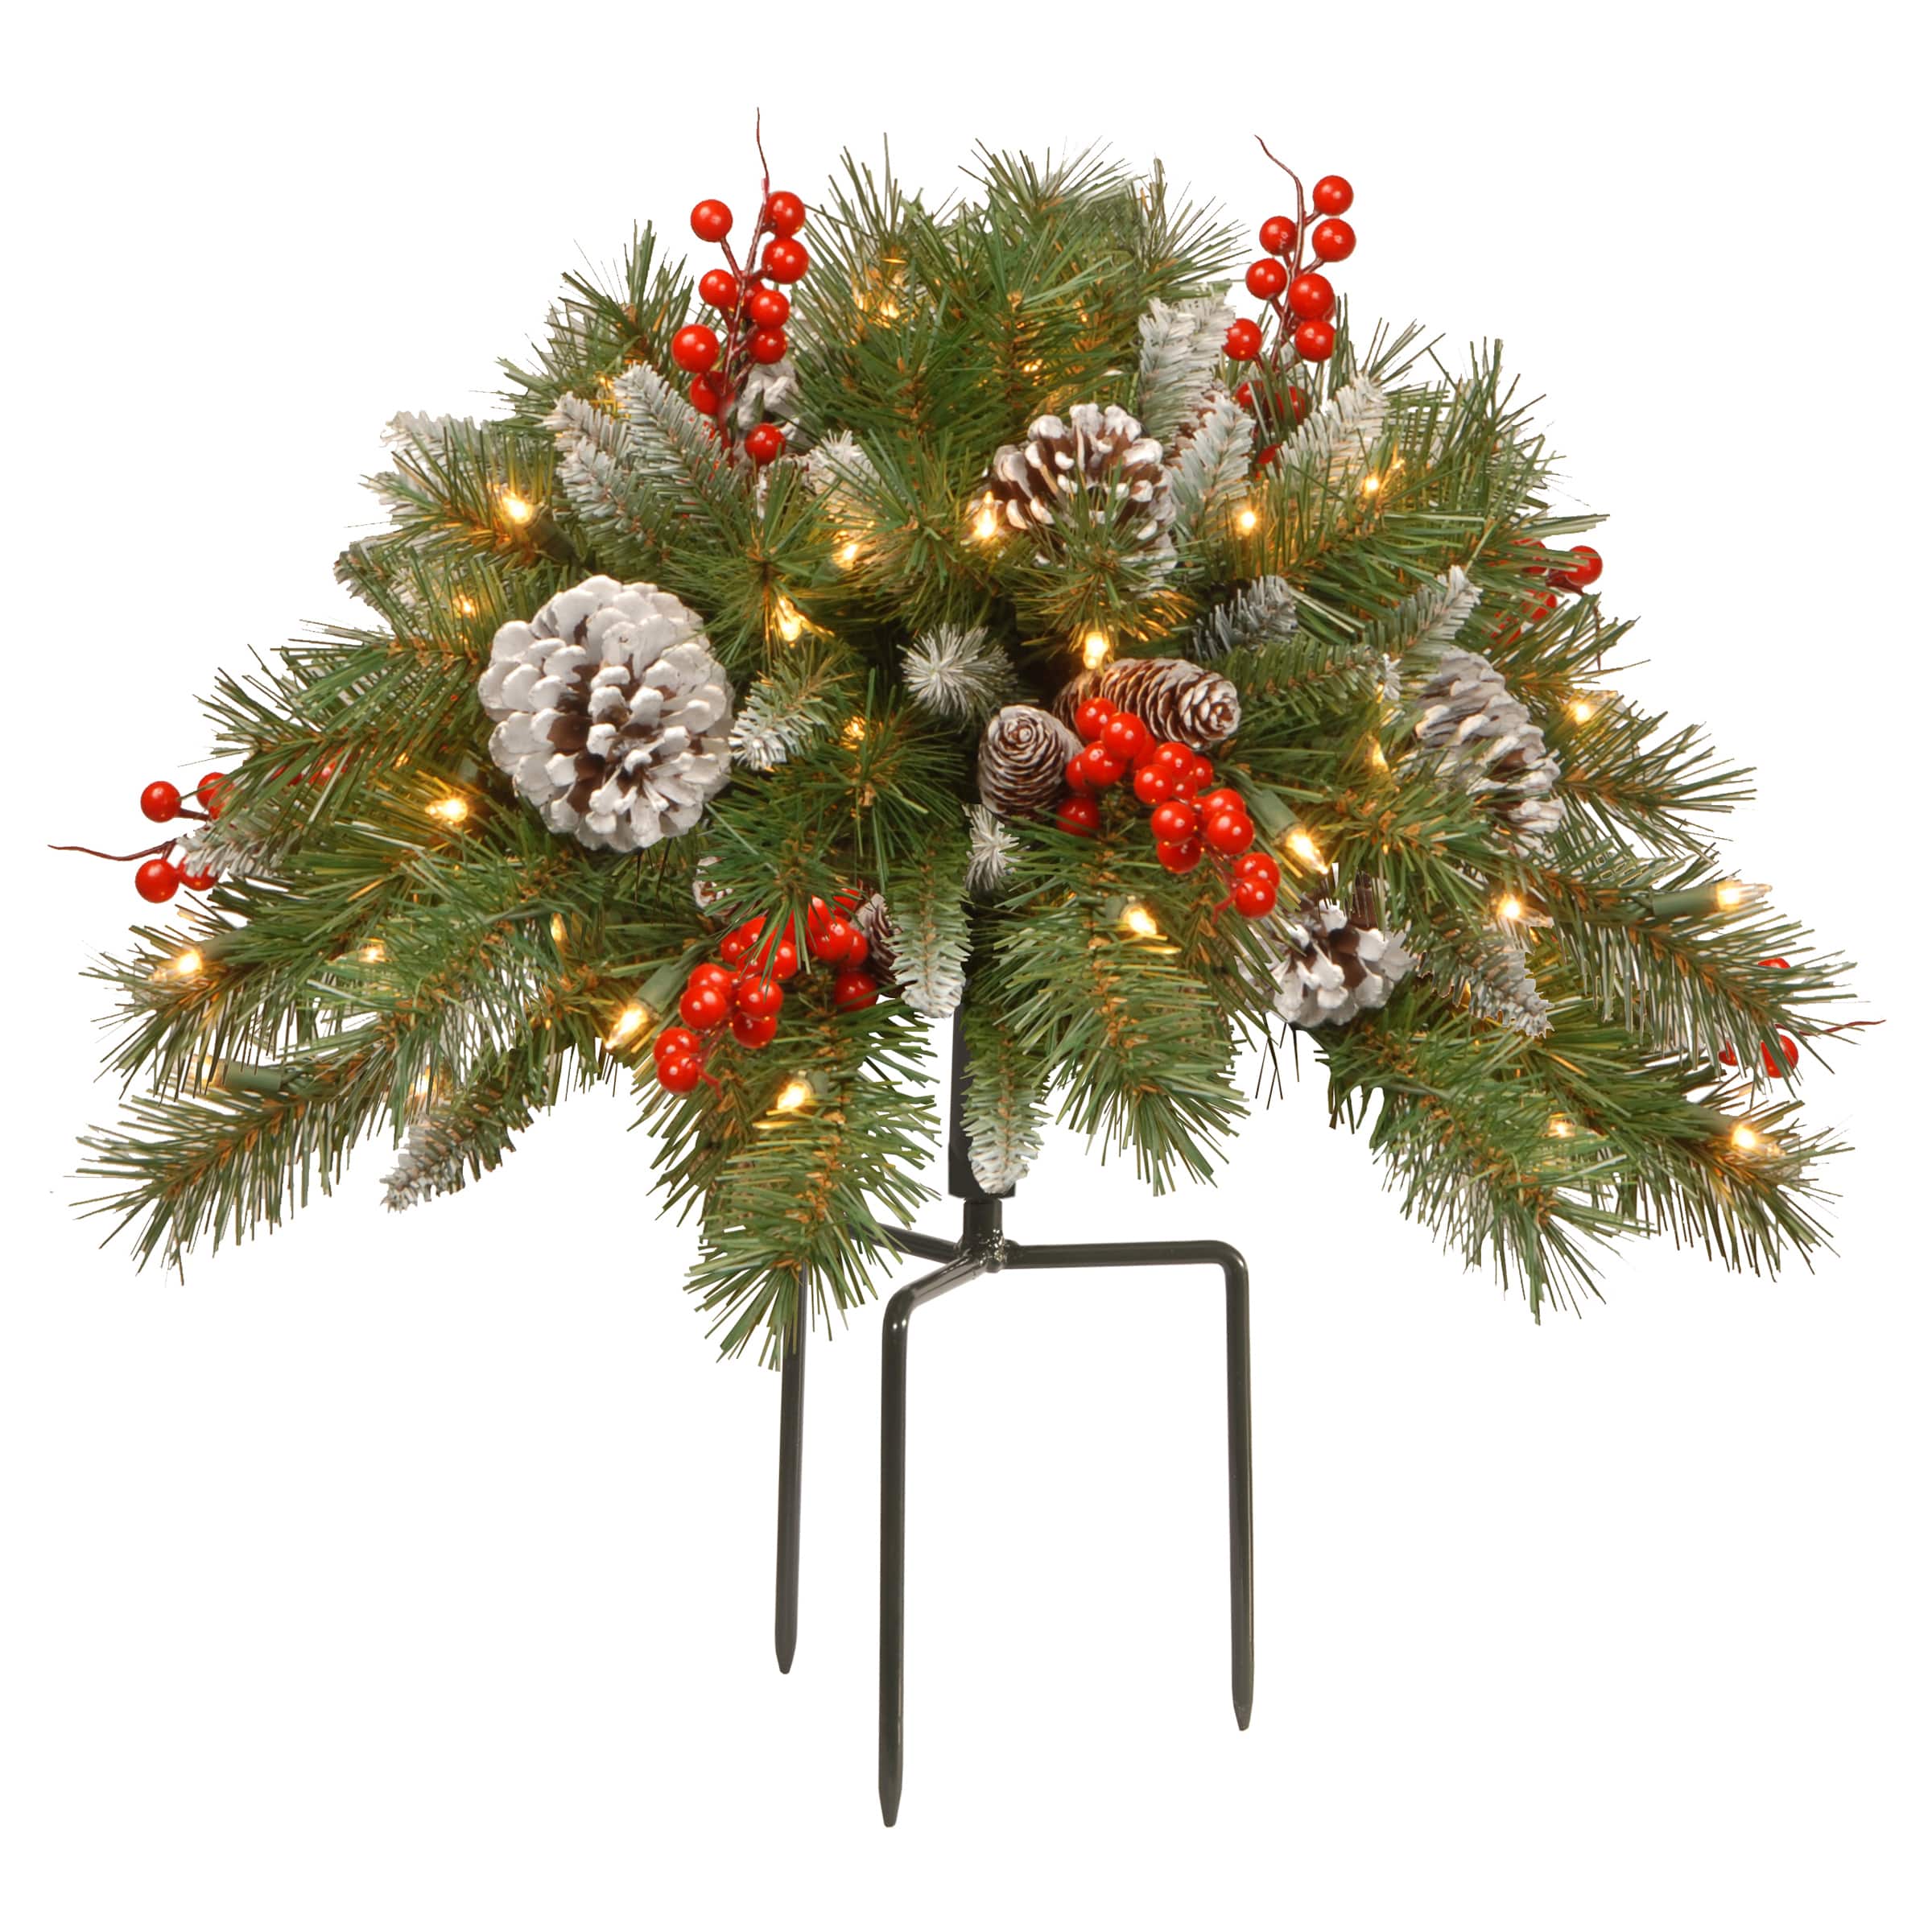 18&#x27; Pre-lit Frosted Berry Artificial Christmas Urn Filler with Cones, Red Berries, Tripod Stake &#x26; Warm White LED Lights